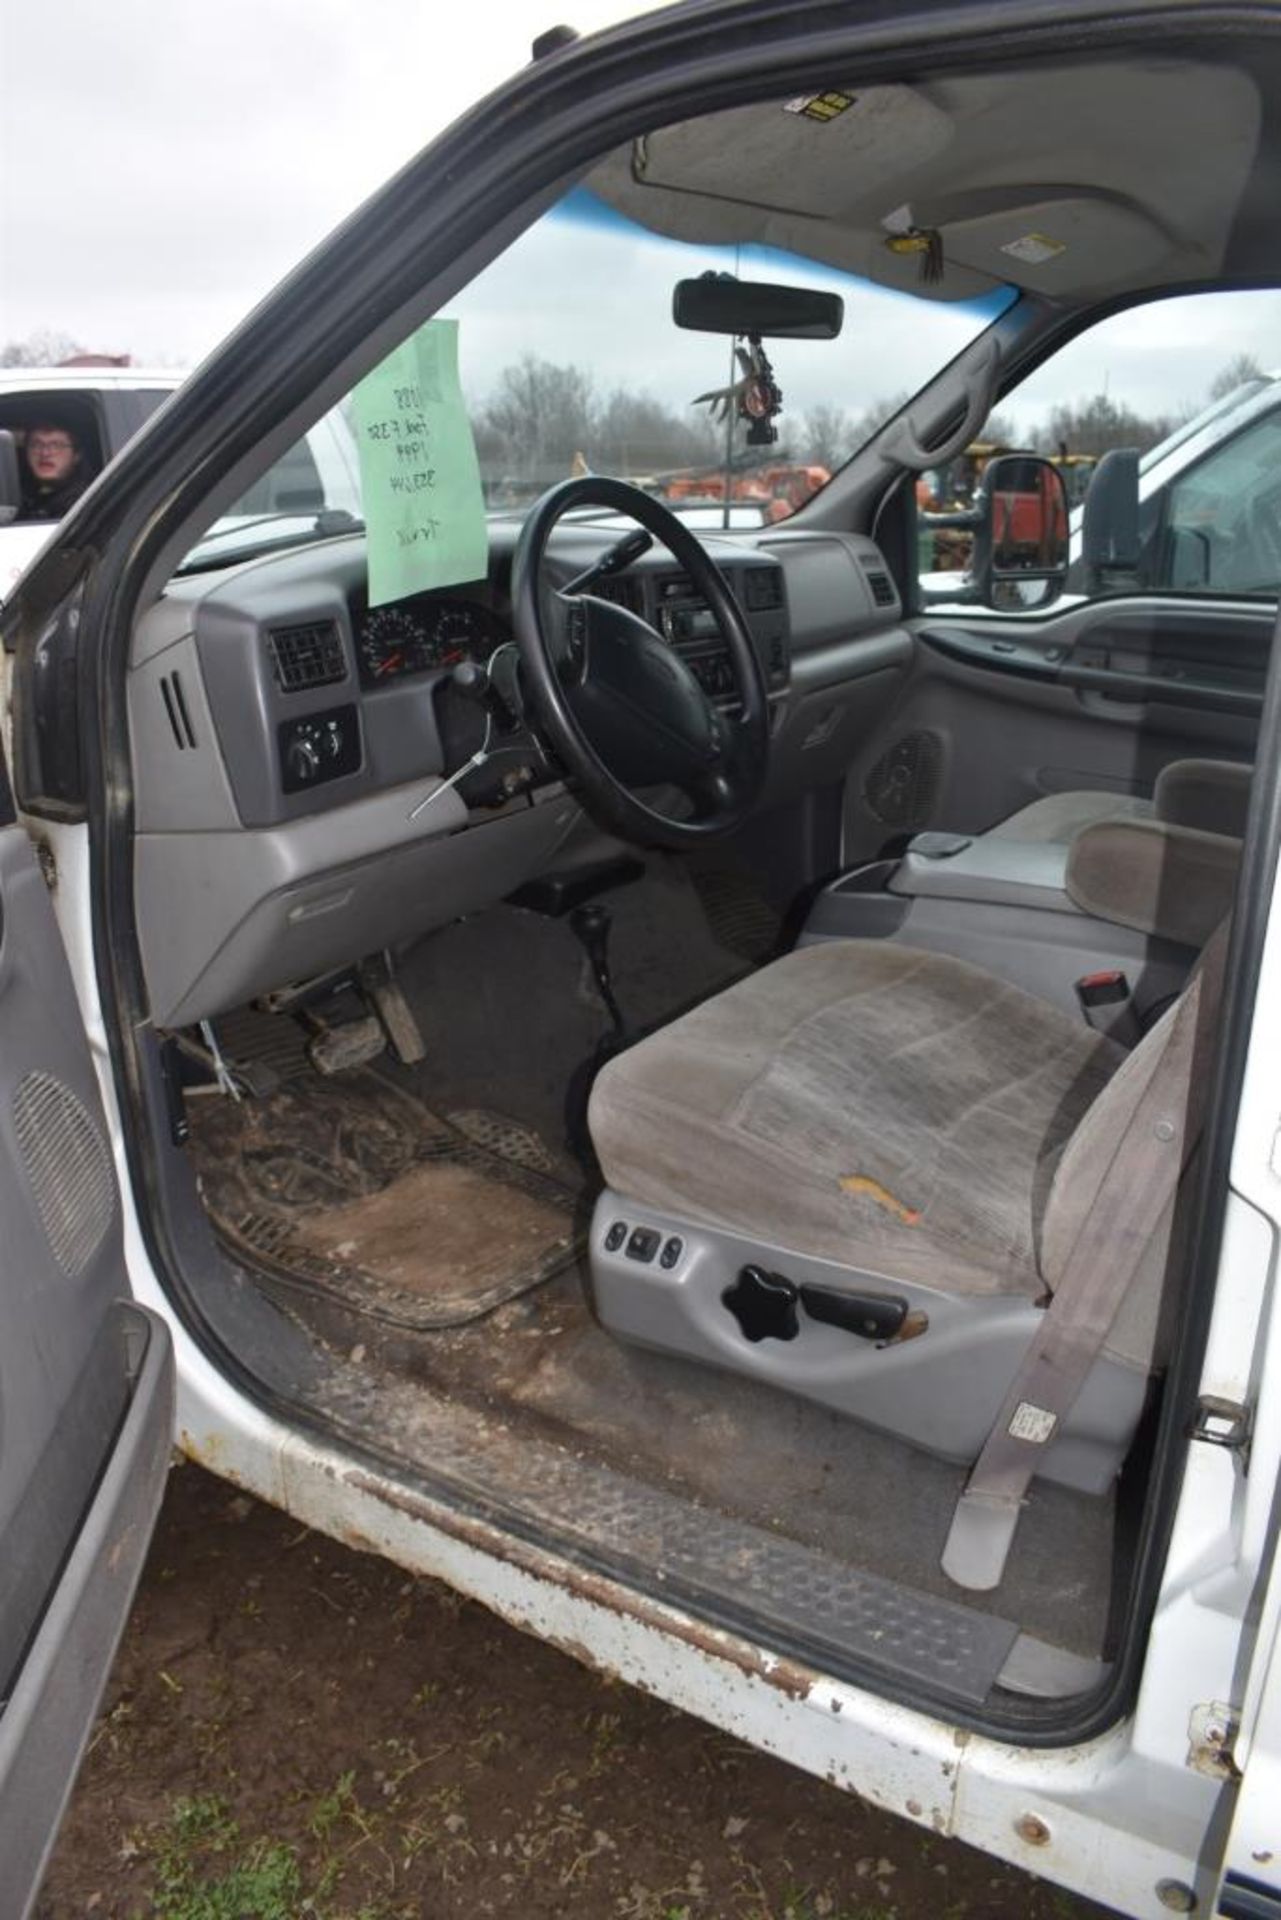 1999 Ford F-350 XLT Super Duty Truck - Image 33 of 38